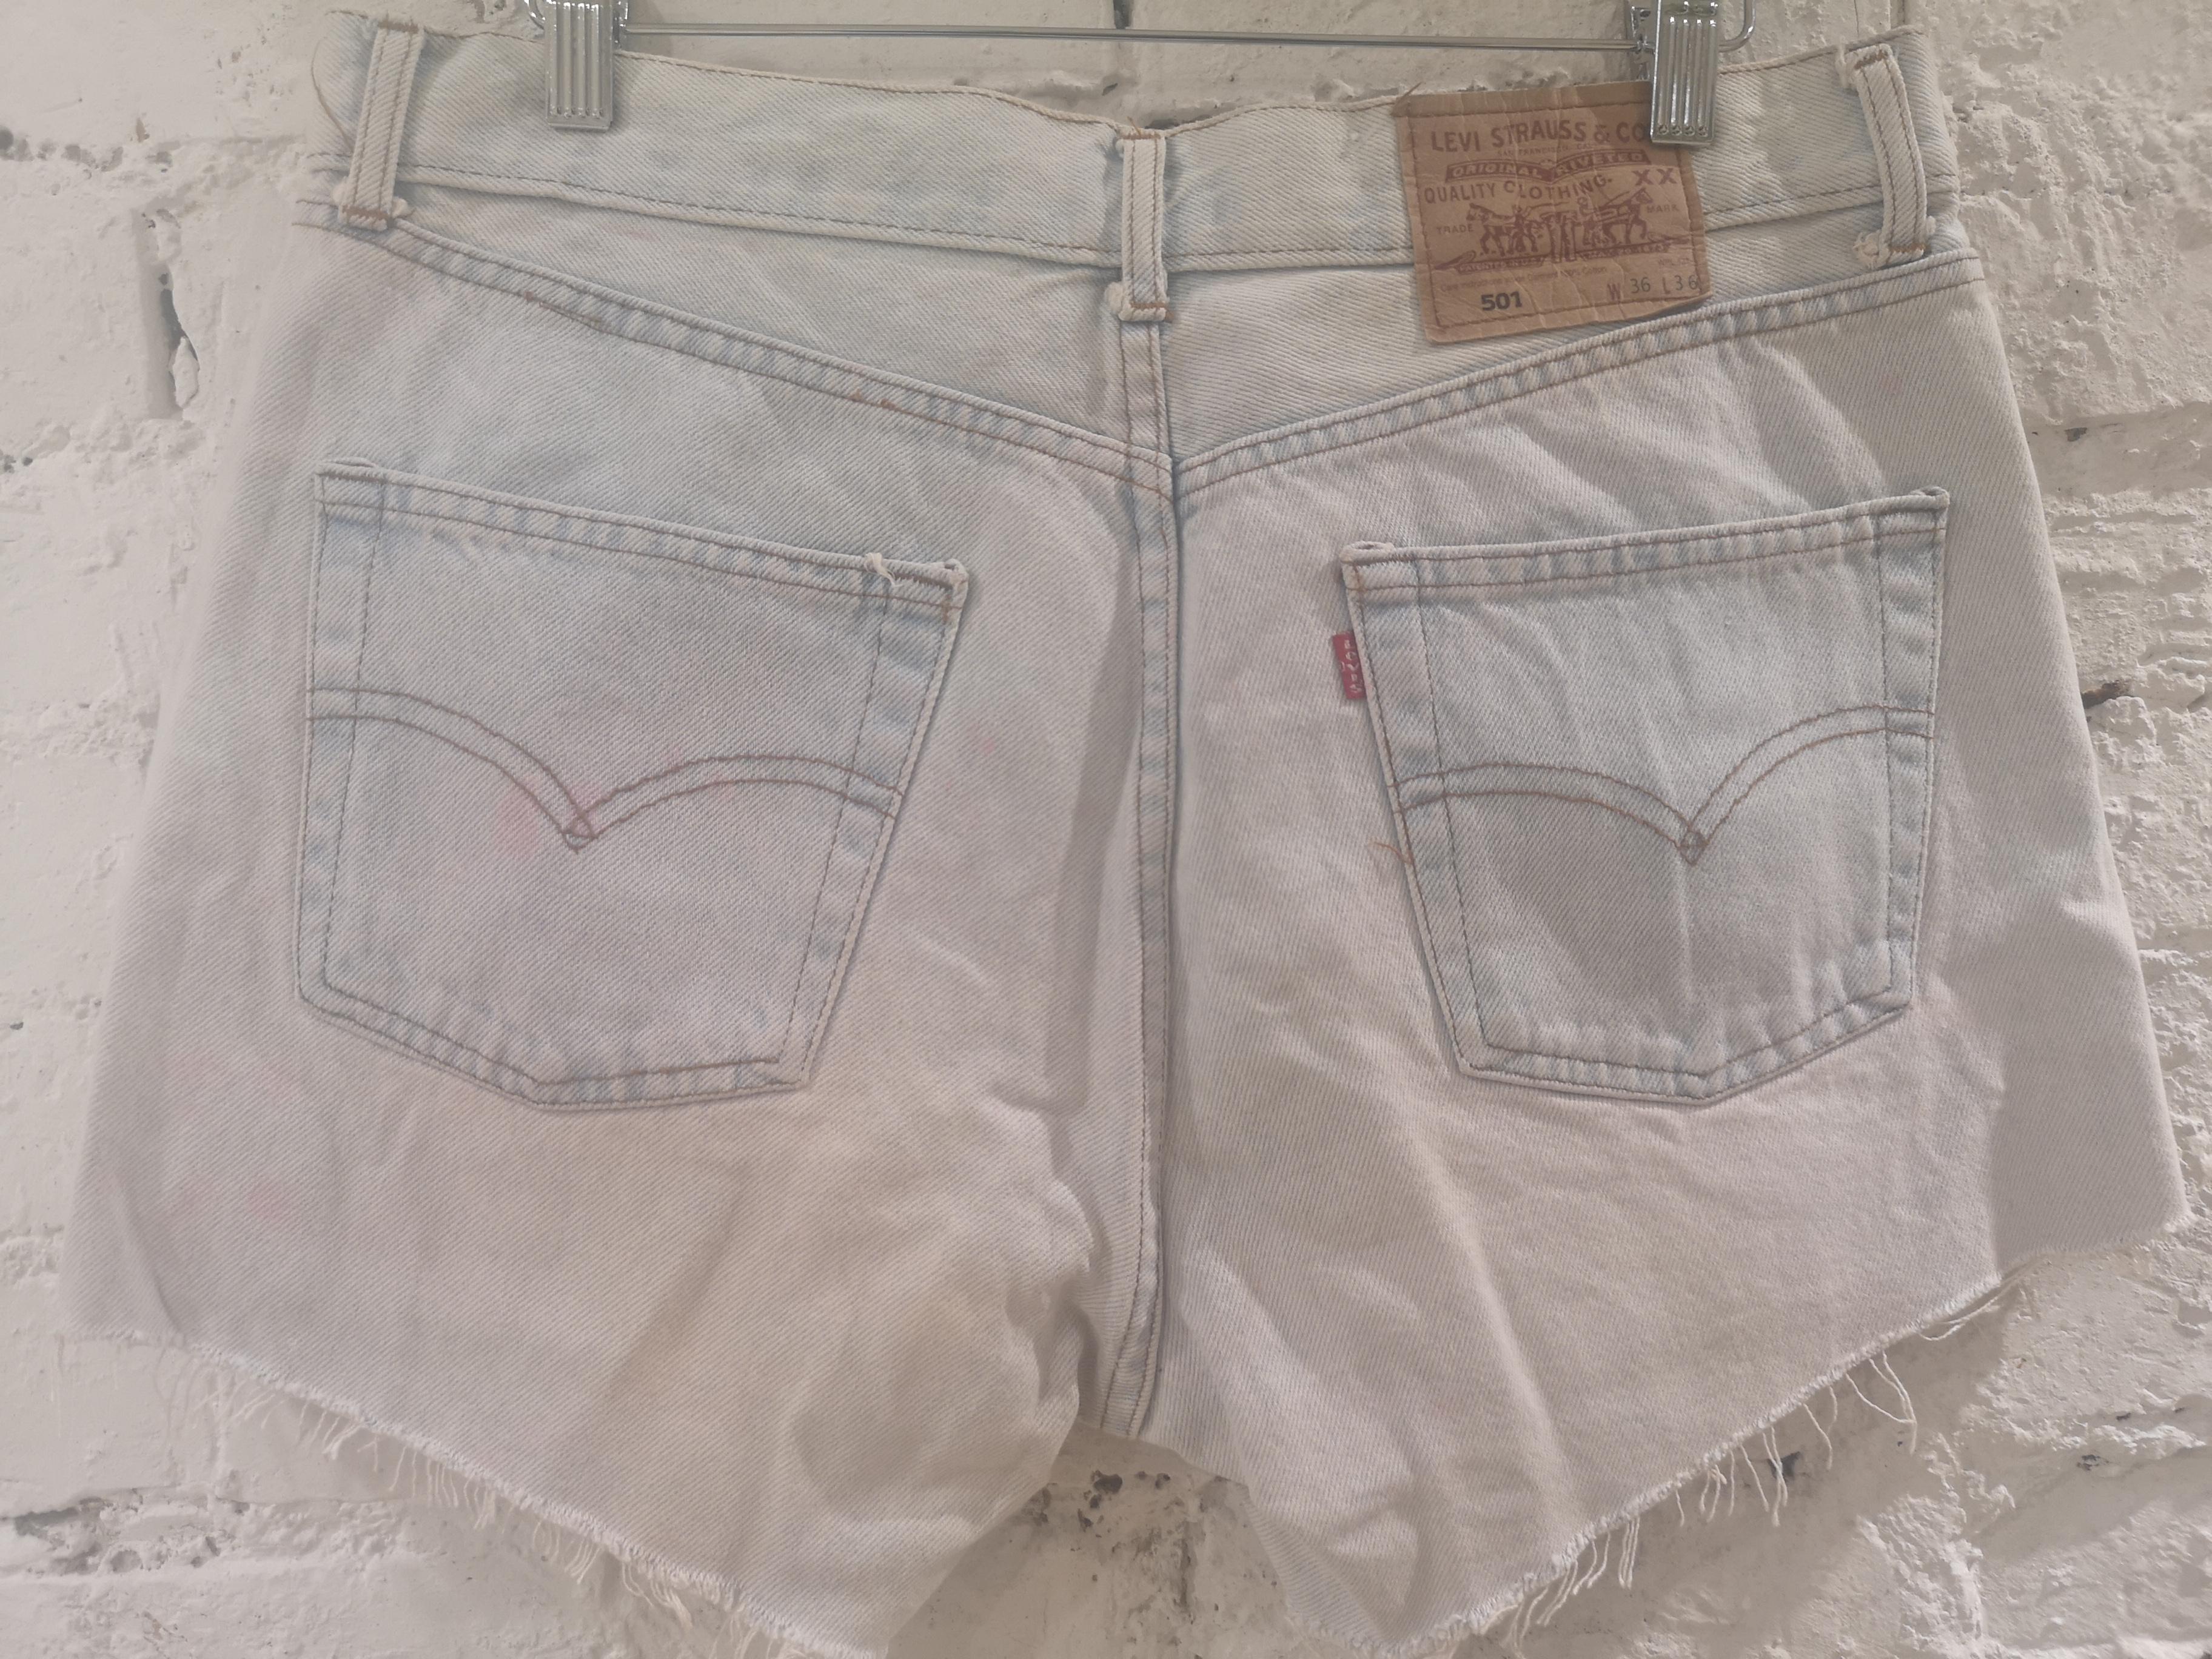 Light blue denim SOAB shorts 
vintage shorts recycled and customised totally handmade embellished with sequins and patterns all over
composition: cotton
total lenght 31 cm waist 8cm